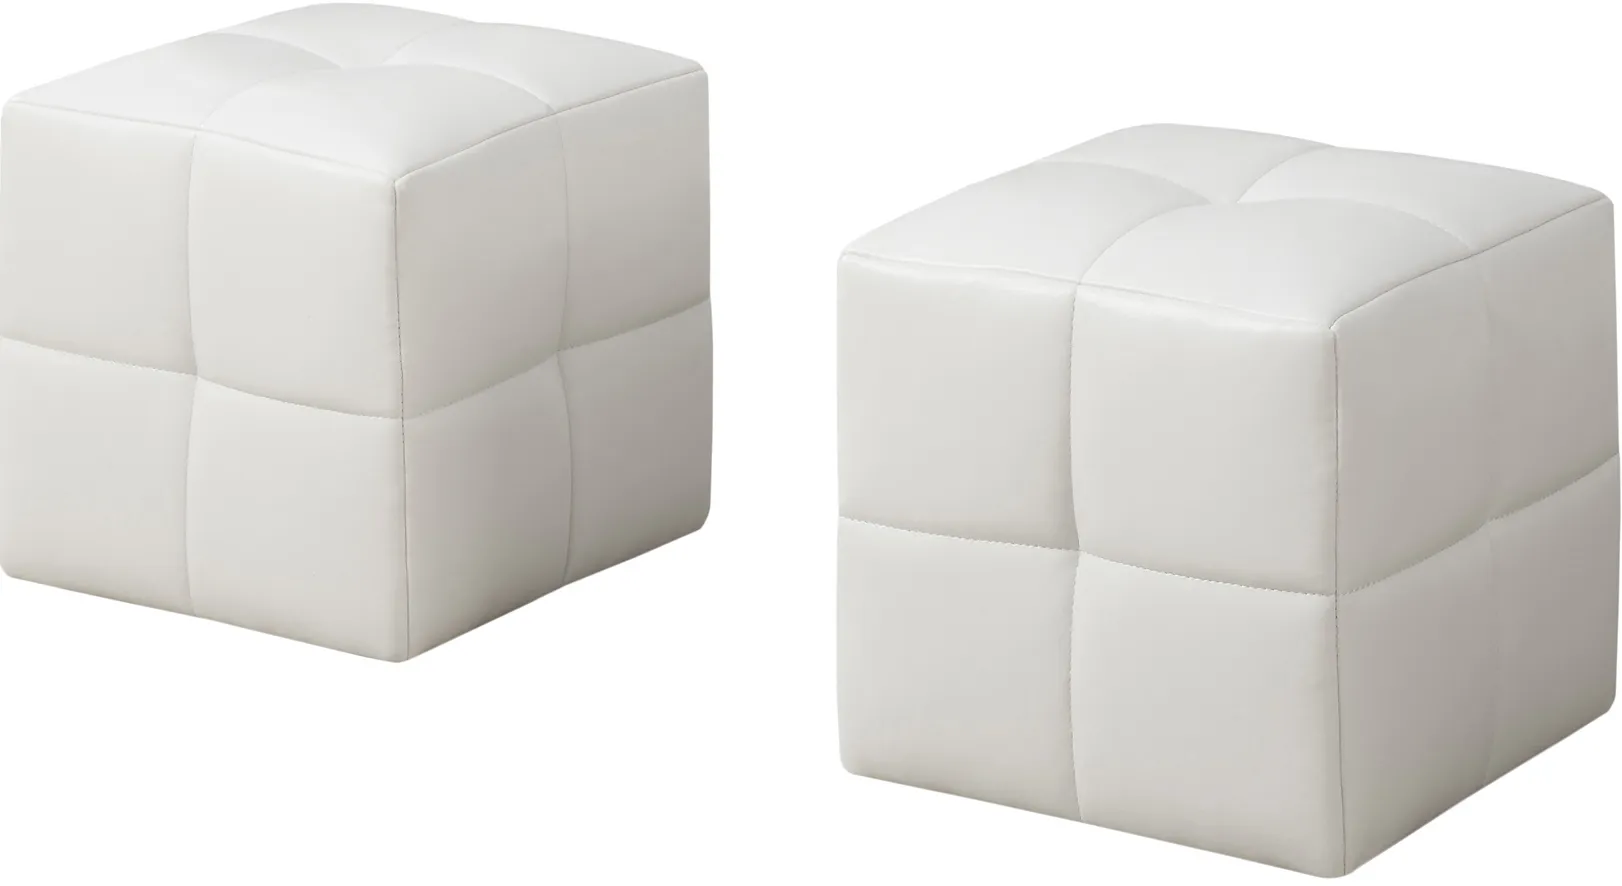 Ottoman, Pouf, Footrest, Foot Stool, Set Of 2, Juvenile, Pu Leather Look, White, Transitional